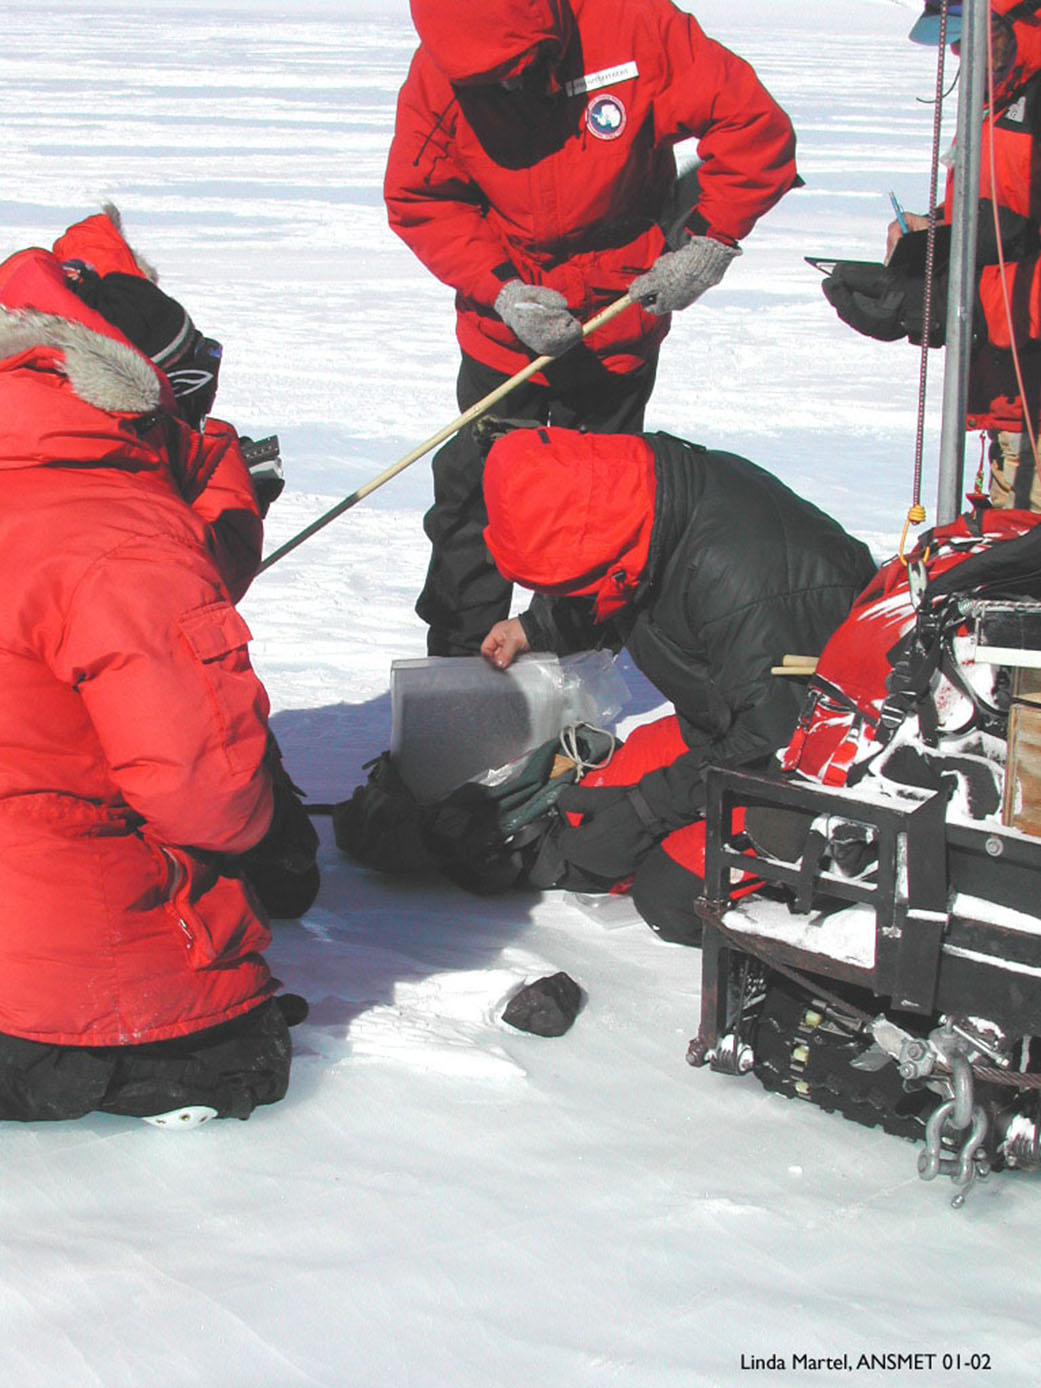 A small black meteorite lies in the snow while a man dressed in black and red winter clothing documents where it was found